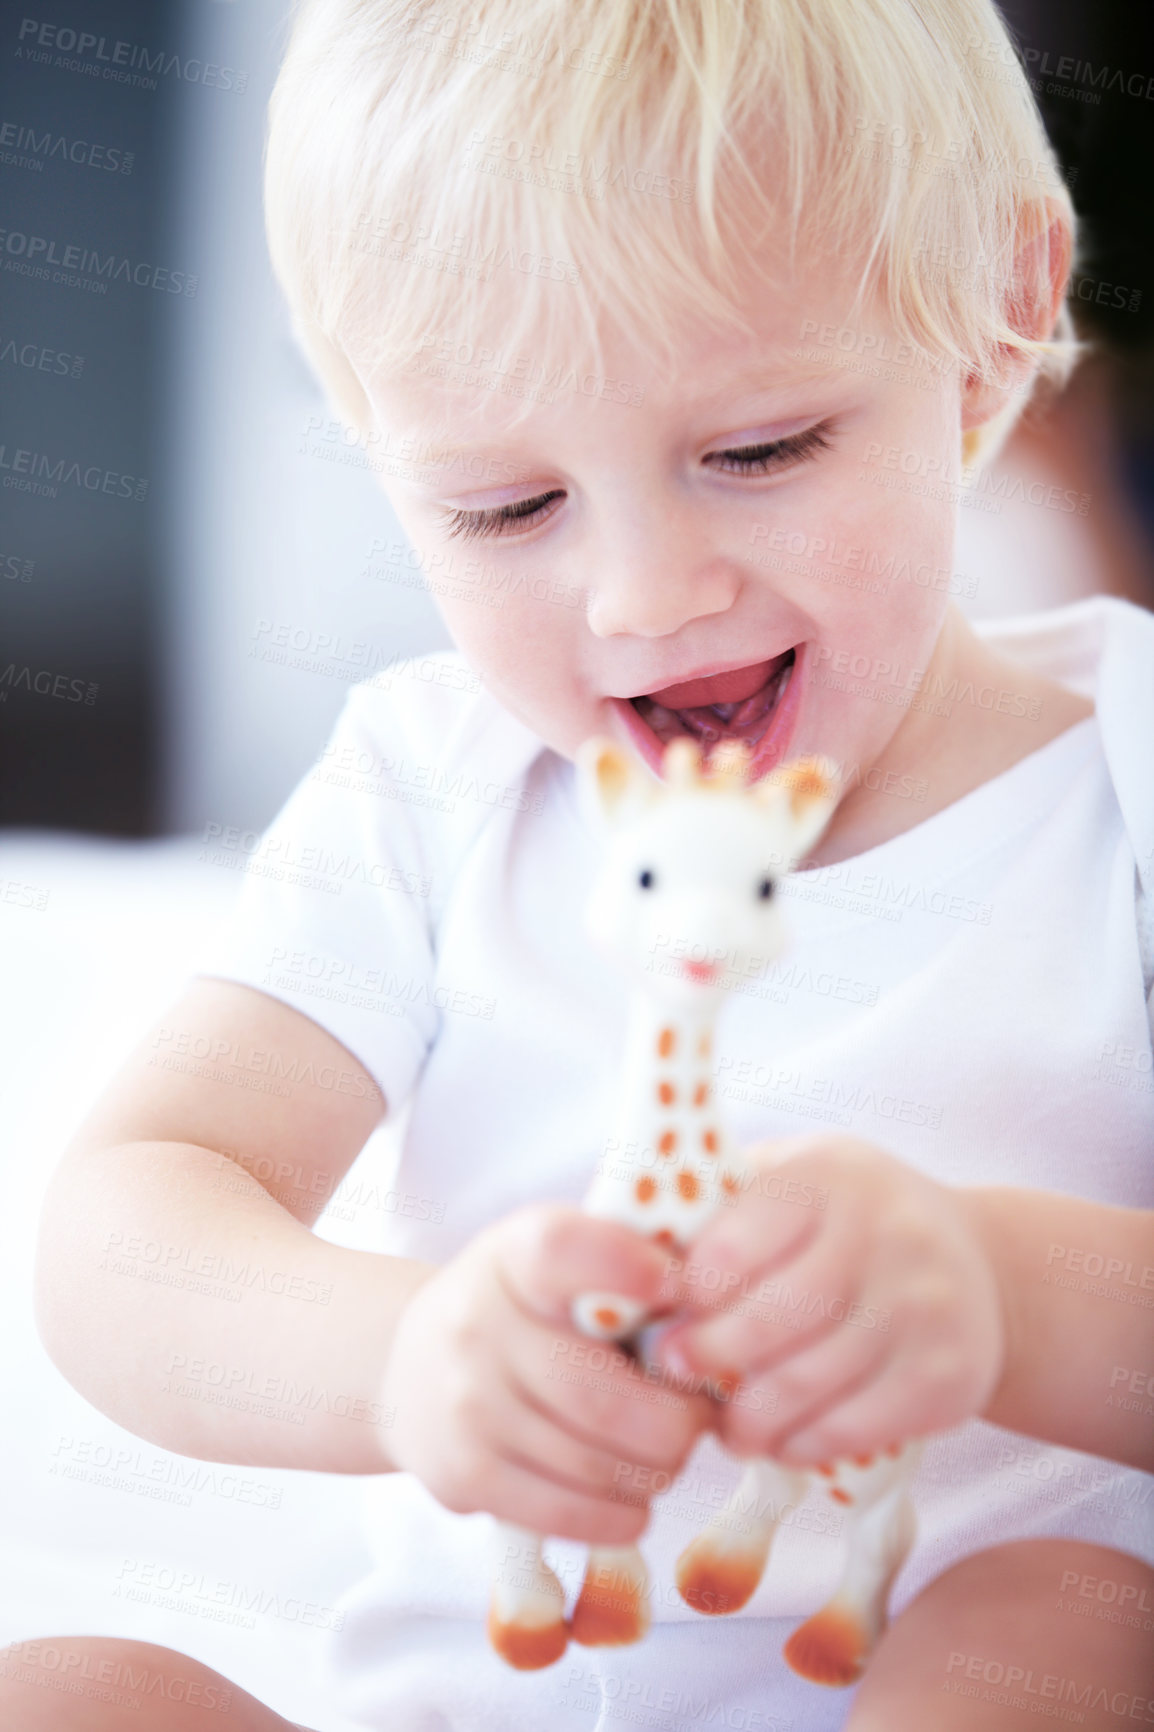 Buy stock photo Shot of a young baby playing with a toy giraffe